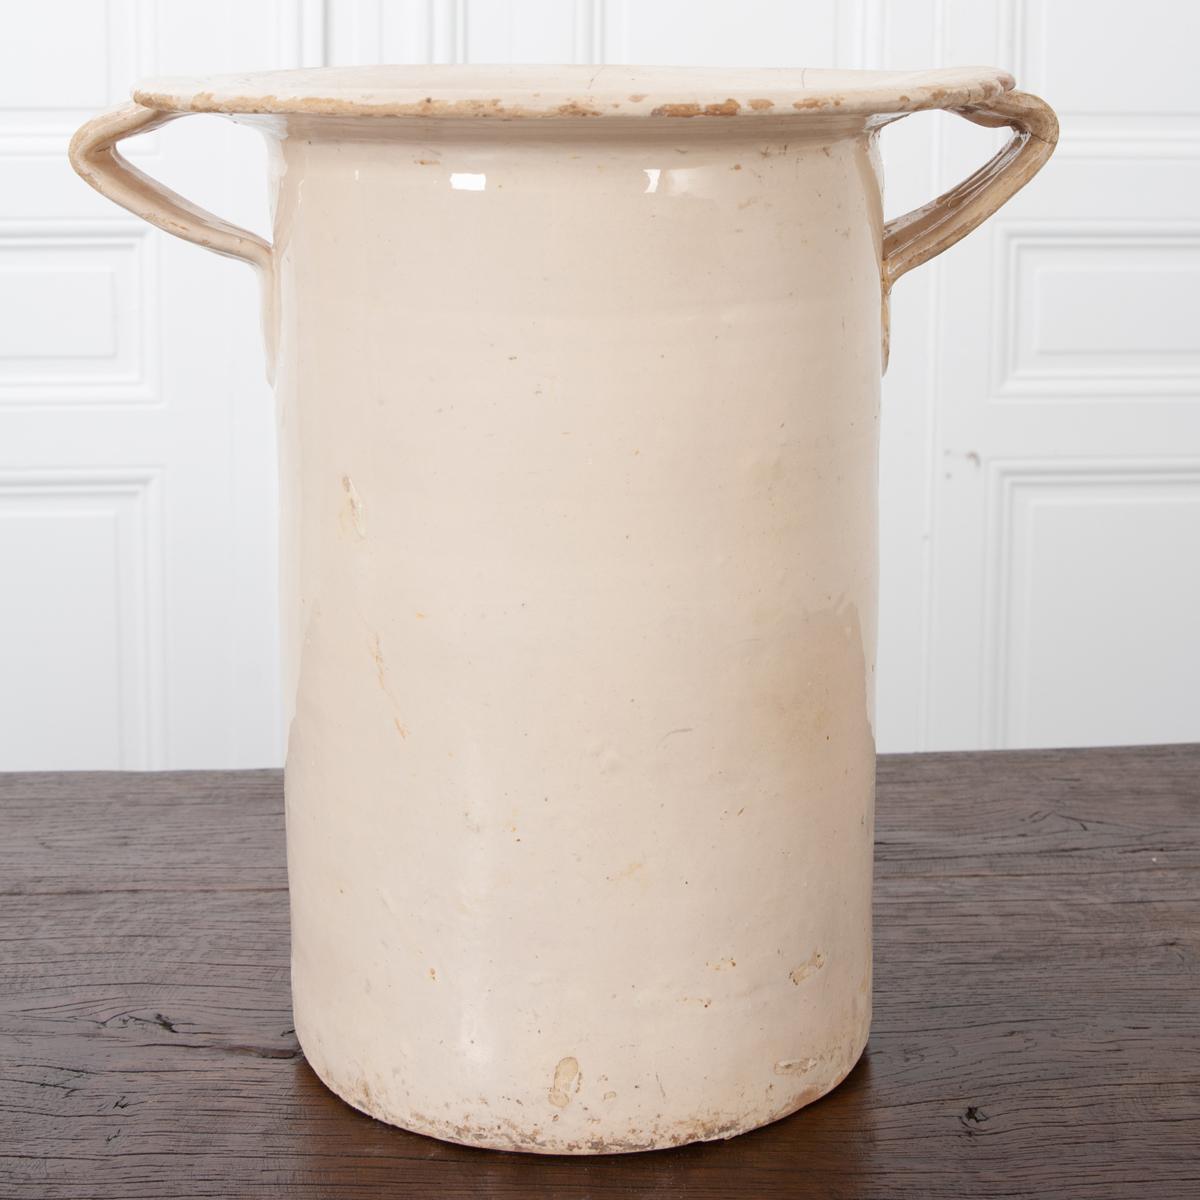 Here are three, extremely versatile large antique Italian pots. Handmade from Italy, these glazed pots are sometimes called Top Hats and would be perfect indoors or outdoors. They are a beautiful creamy-beige glazed ceramic, rustic vase with two